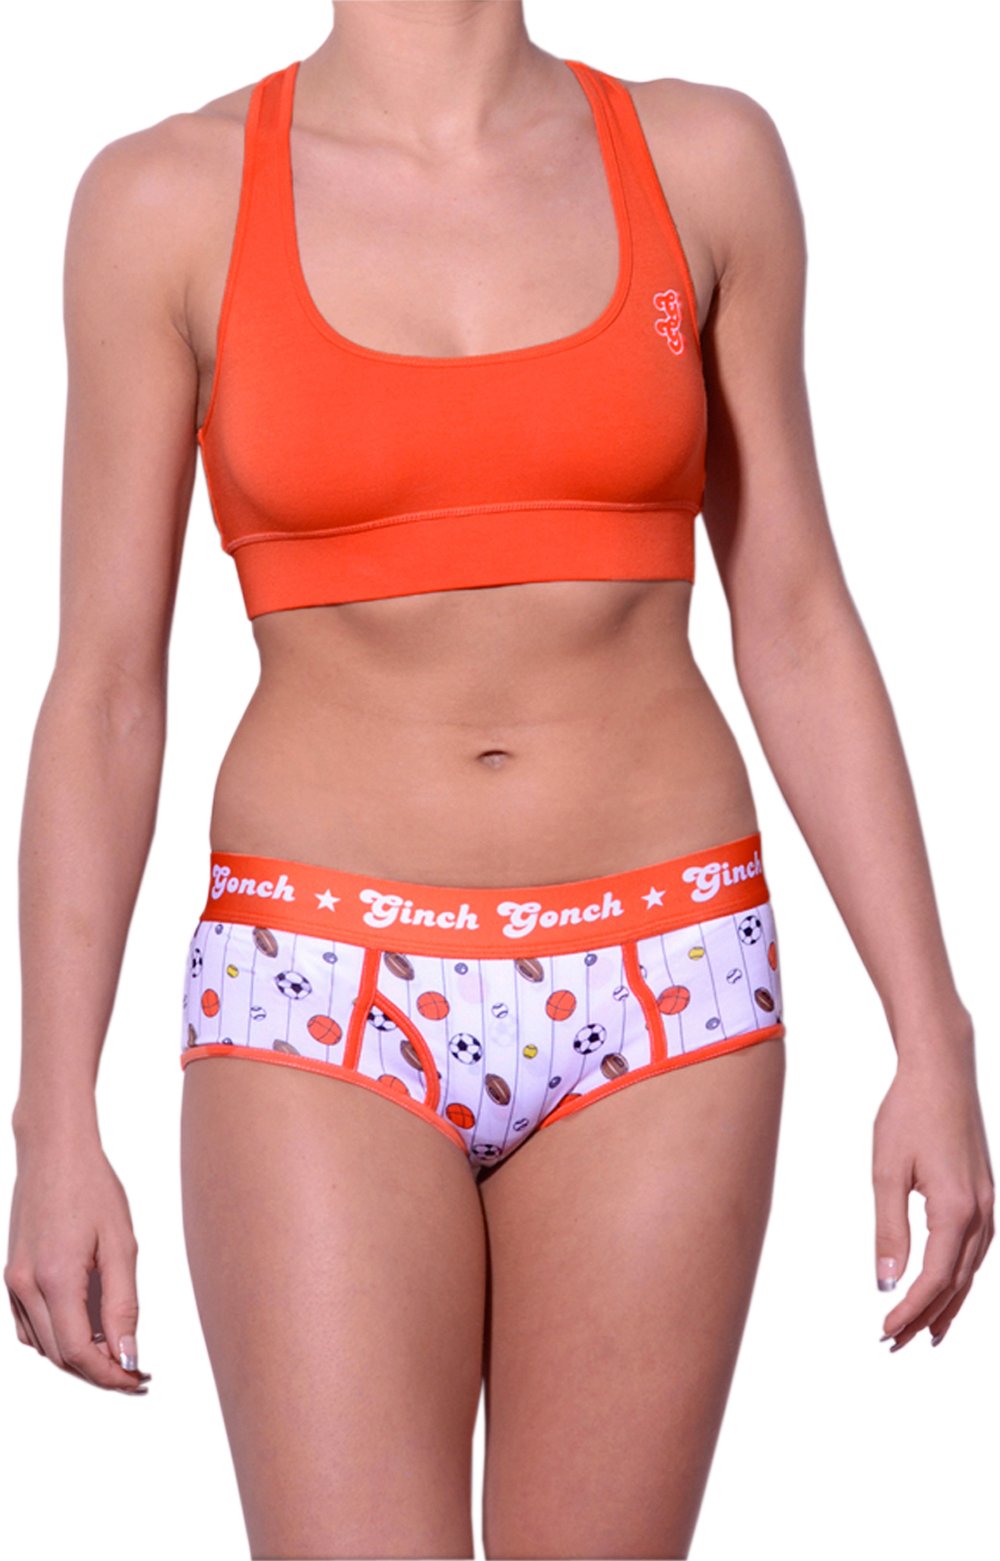 GG Ginch Gonch Hardball boy cut Brief - women's Underwear - pin striped white fabric with basketballs, footballs, soccer balls, tennis balls, and baseballs. Orange trim and y front with orange printed waistband front